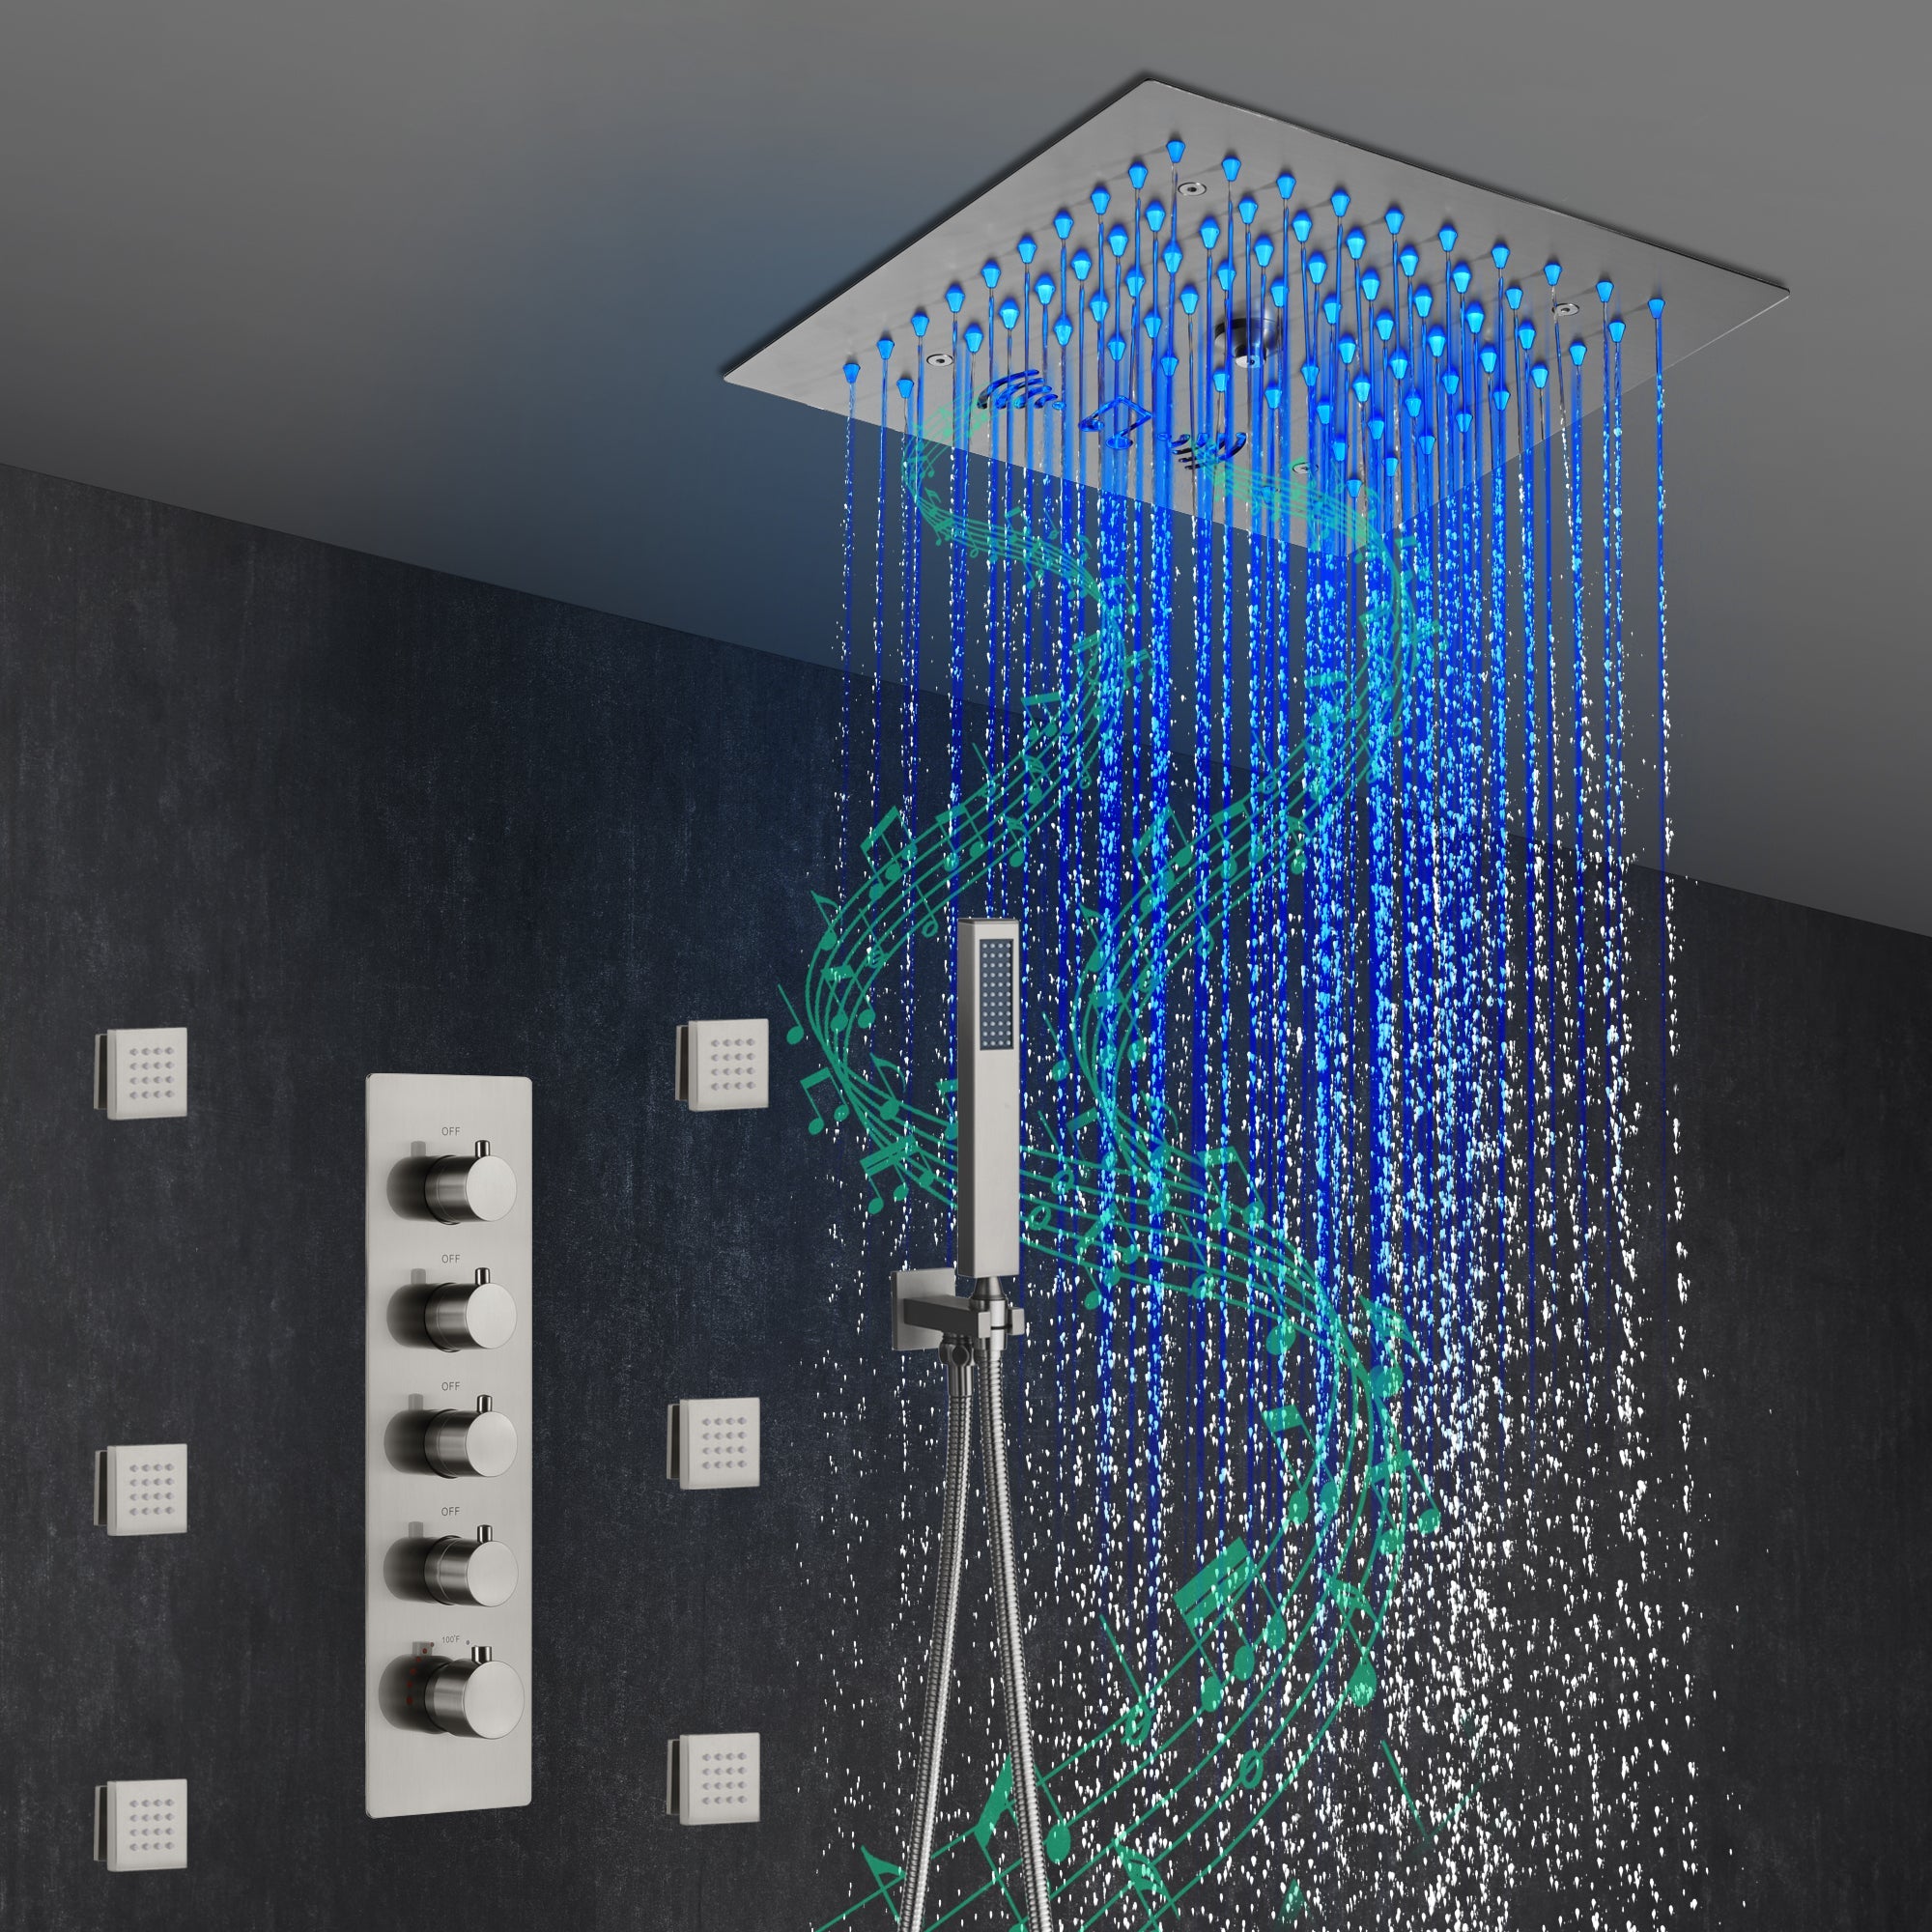 12-Inch Flush-Mount Brushed Nickel Thermostatic Shower Faucet: 4-Way Control, 64-Color LED Lighting, Bluetooth Music, and Body Sprayers